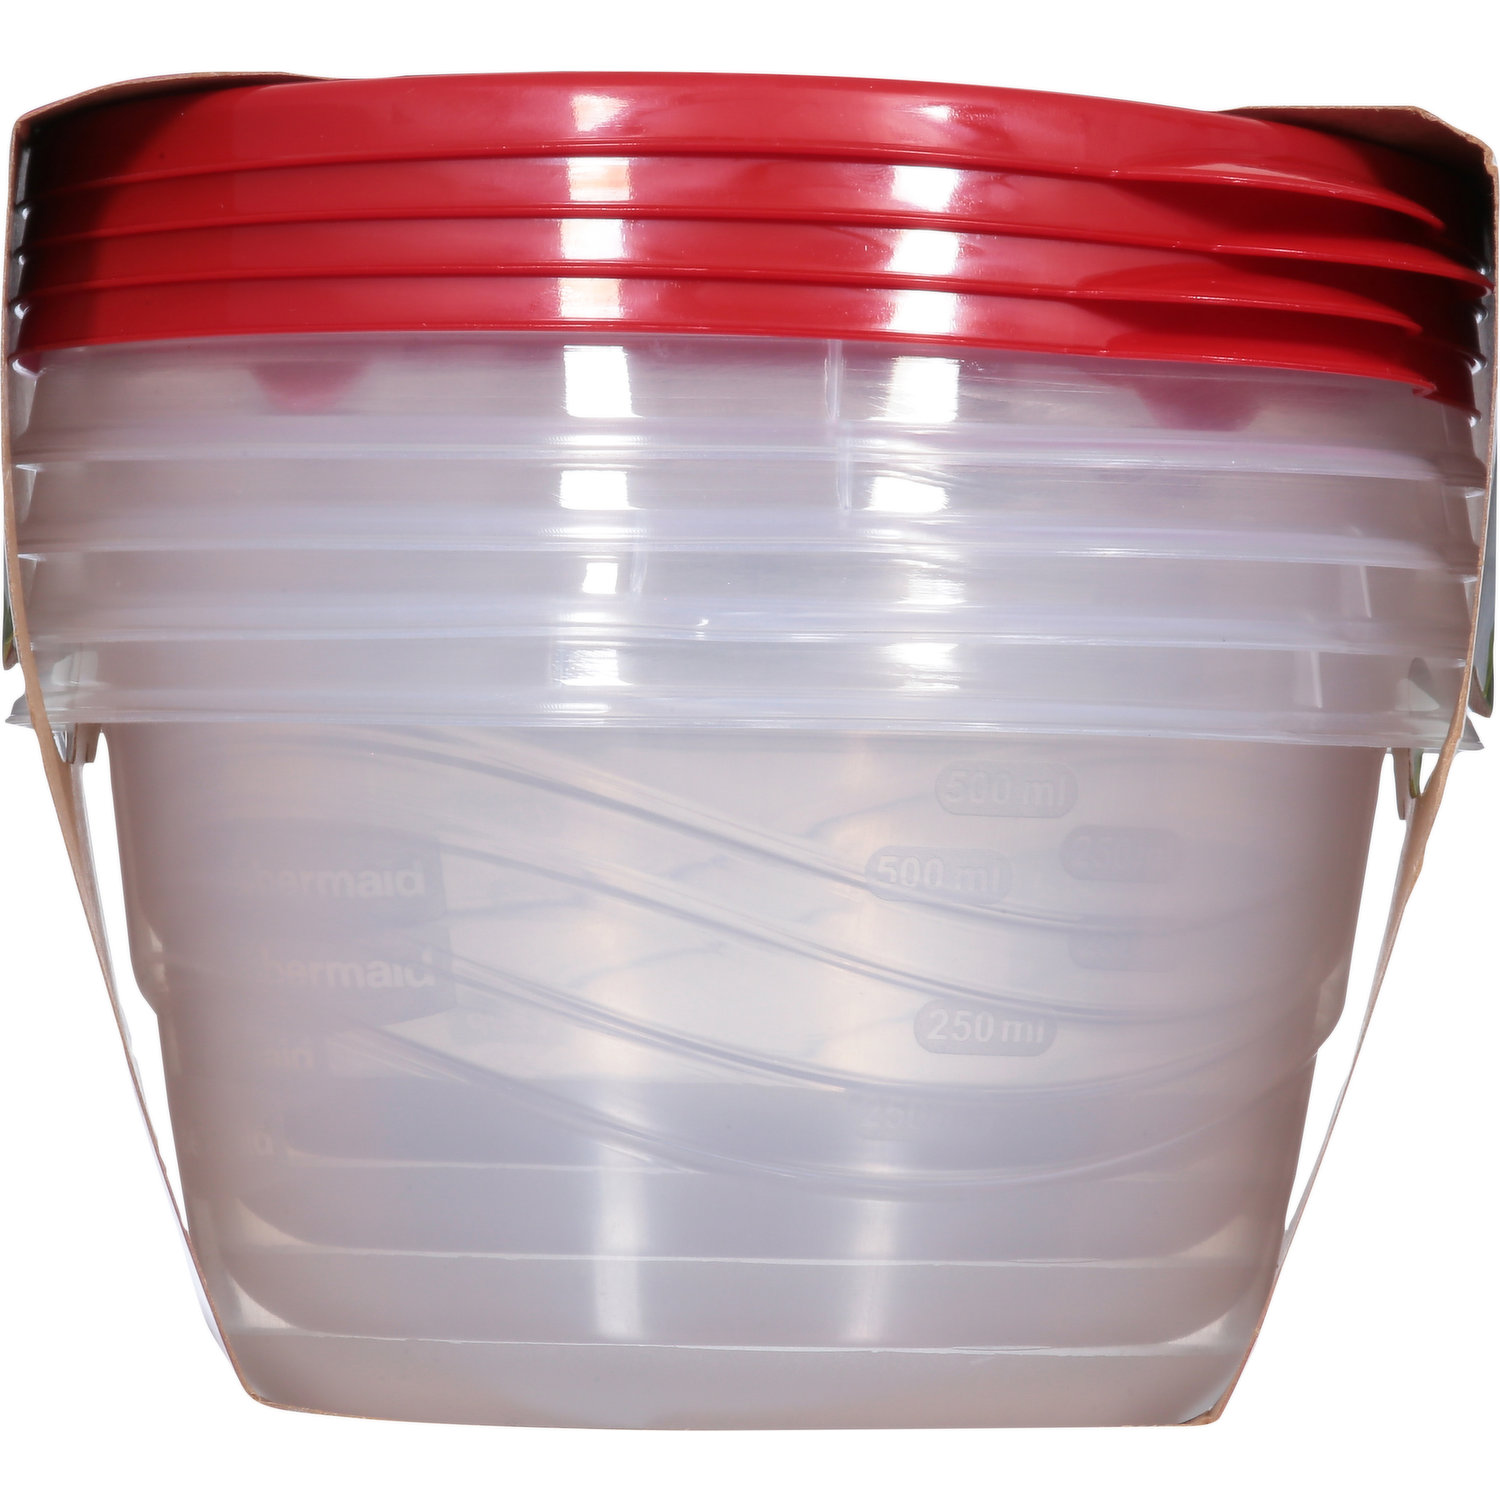 Rubbermaid Take Along Divided Snack Bowls, Chili Red, 2.2 Cup, 3-Count -  Bed Bath & Beyond - 21584821